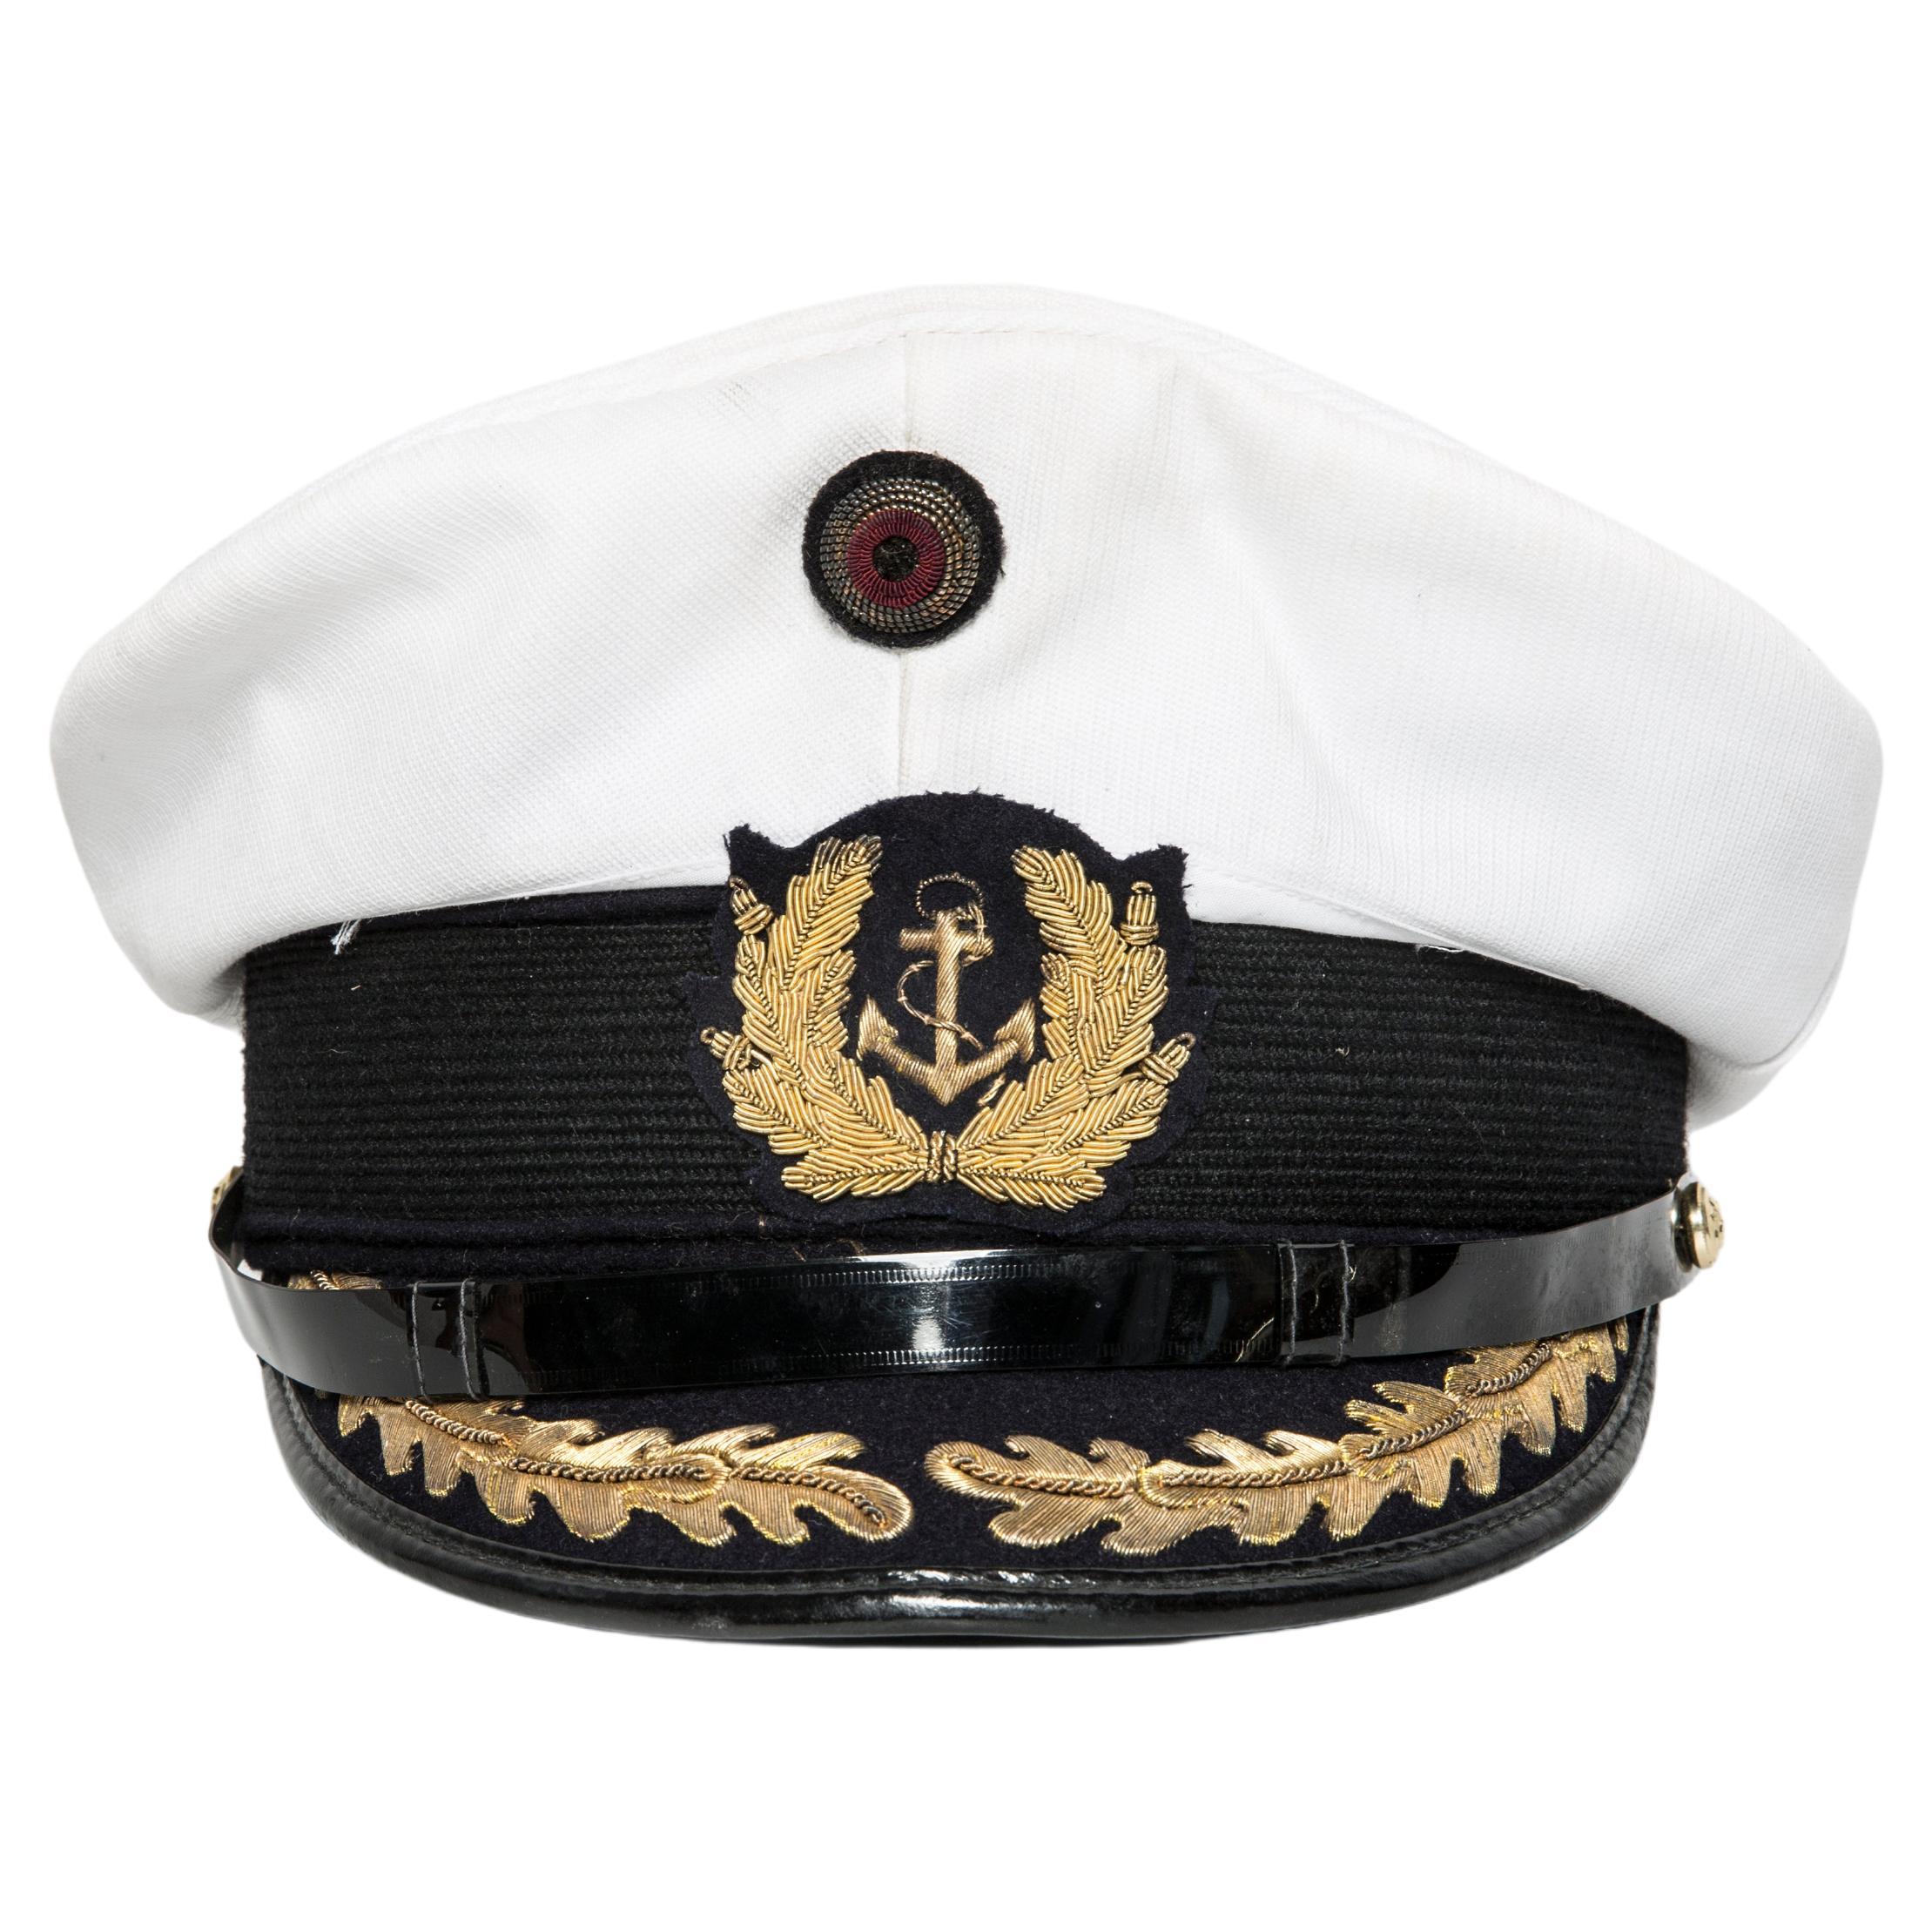 Vintage White and Navy Blue Capitan Hat, Europe, 1977